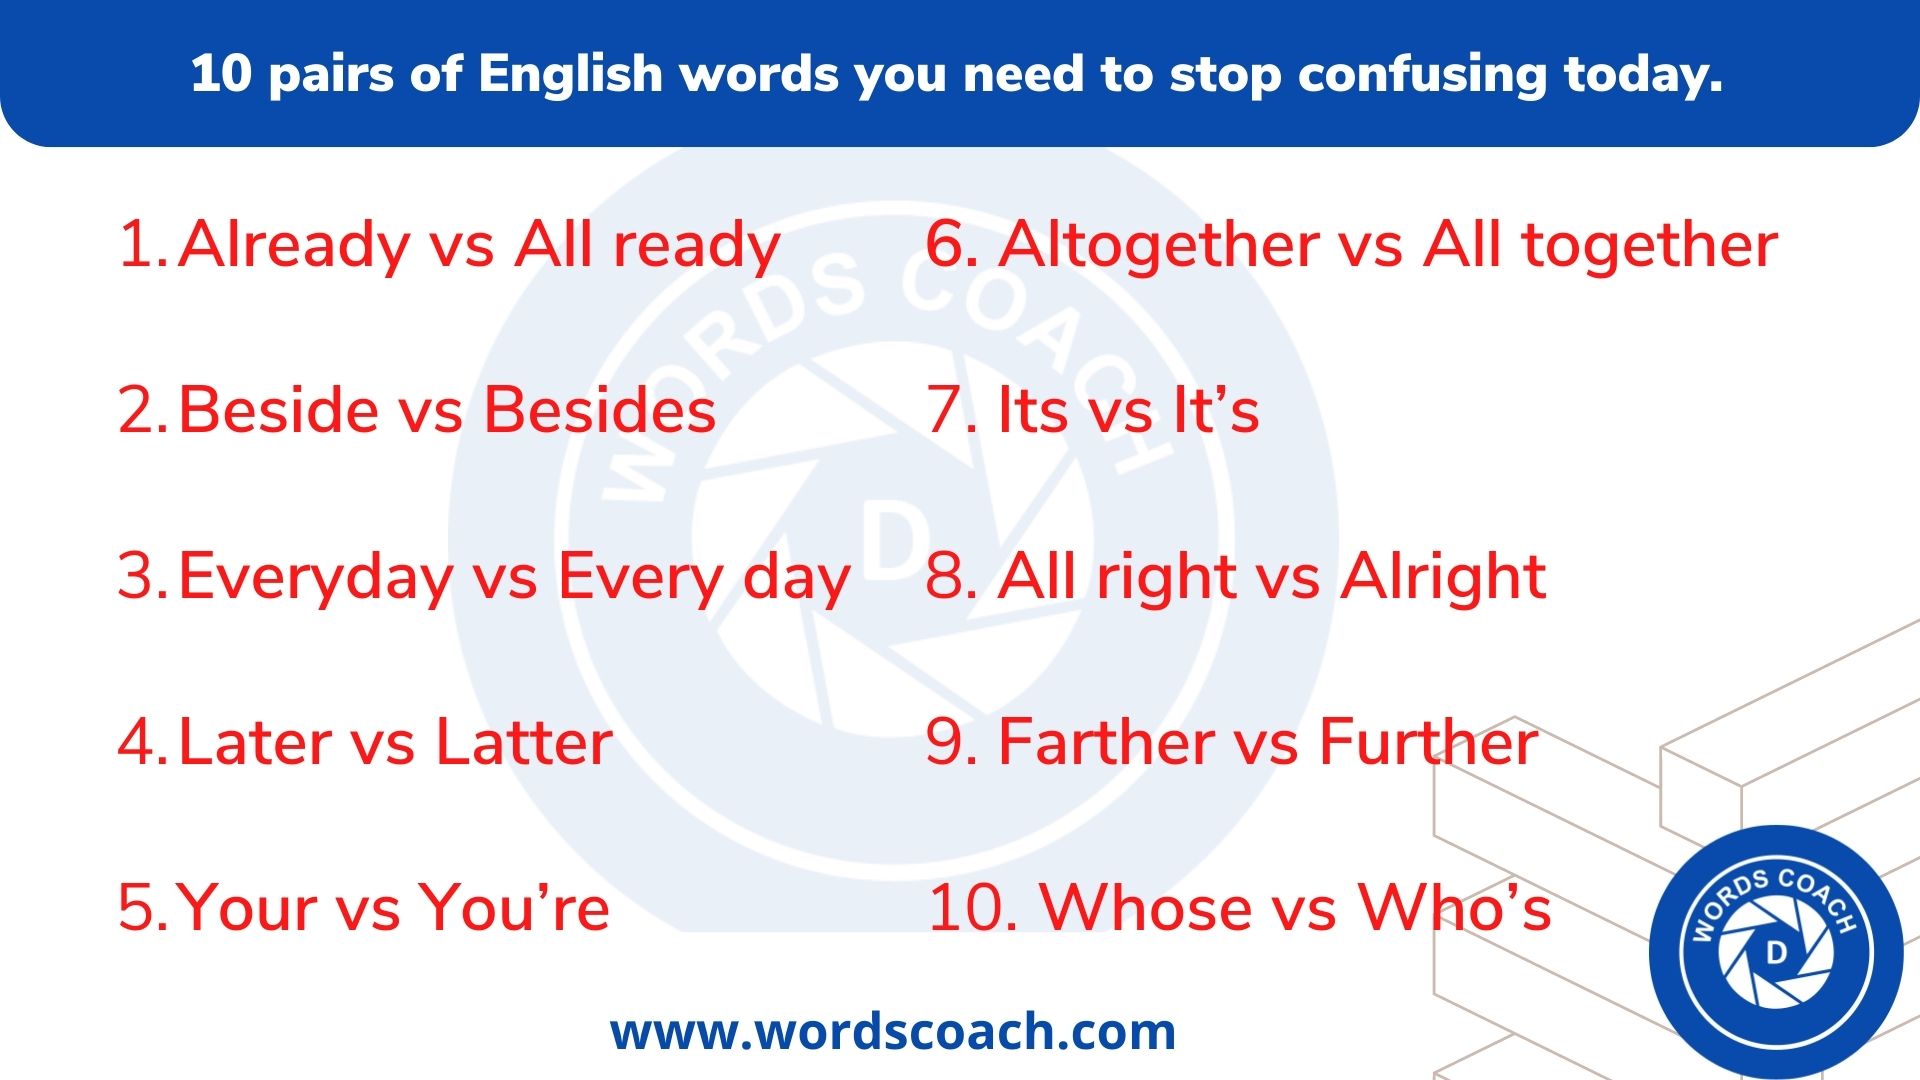 10 pairs of English words you need to stop confusing today. - wordscoach.com